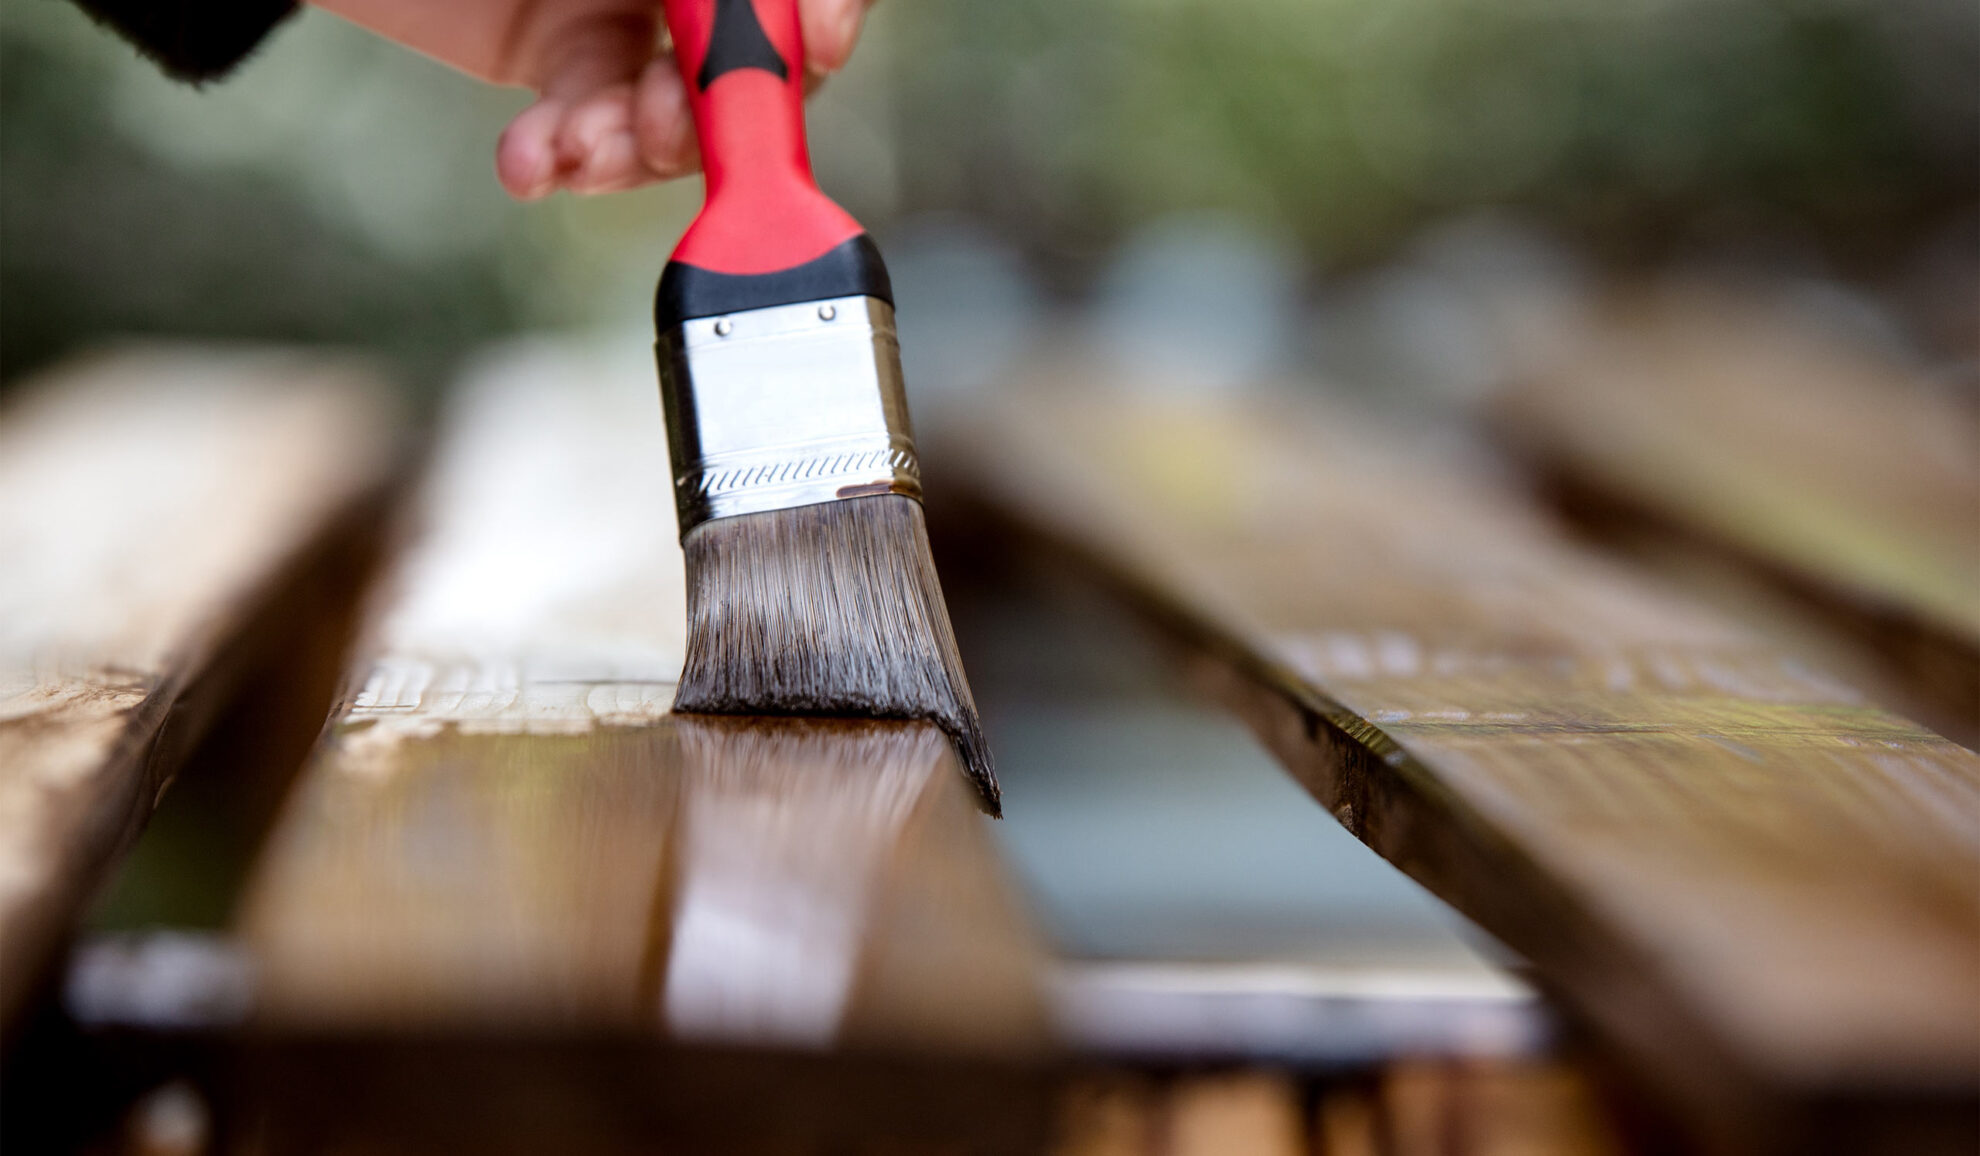 painting brush close up staining wooden deck bellbrook oh